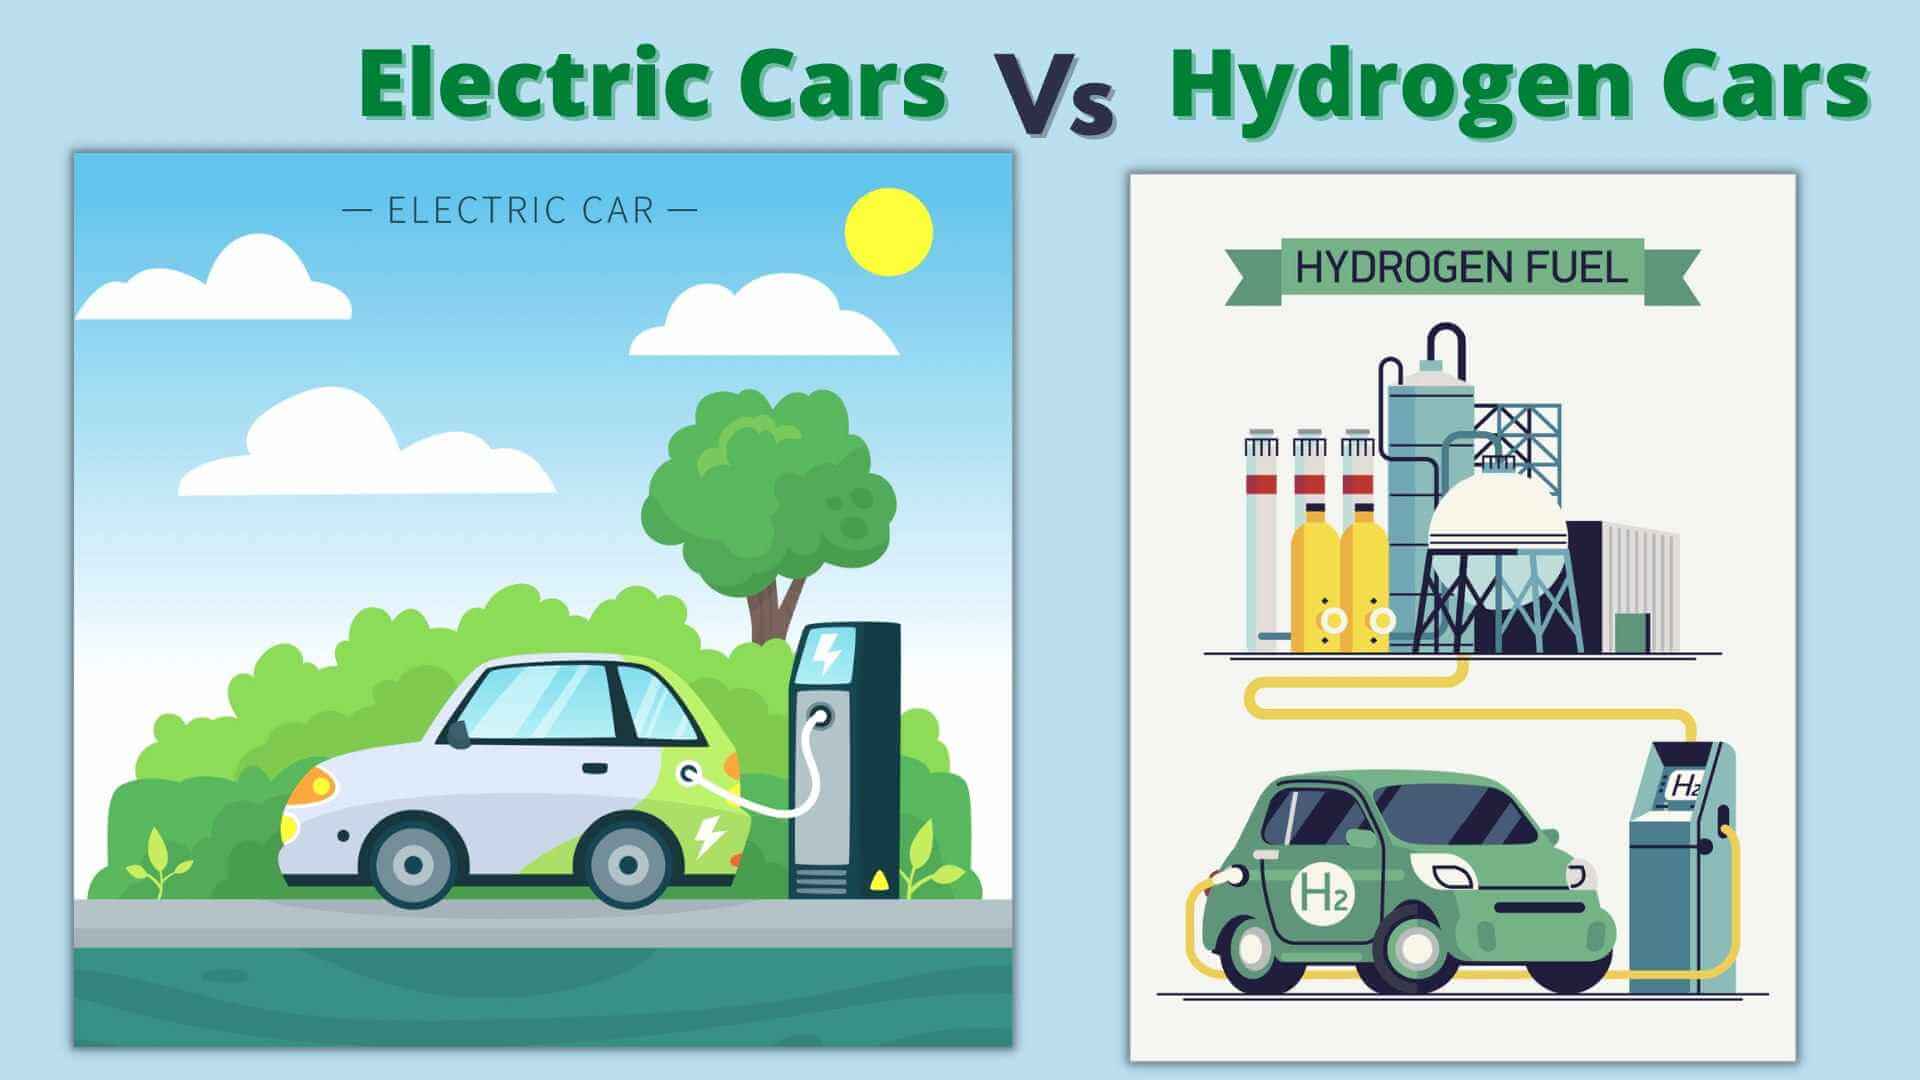 https://e-vehicleinfo.com/electric-cars-vs-hydrogen-cars-good-for-the-environment/